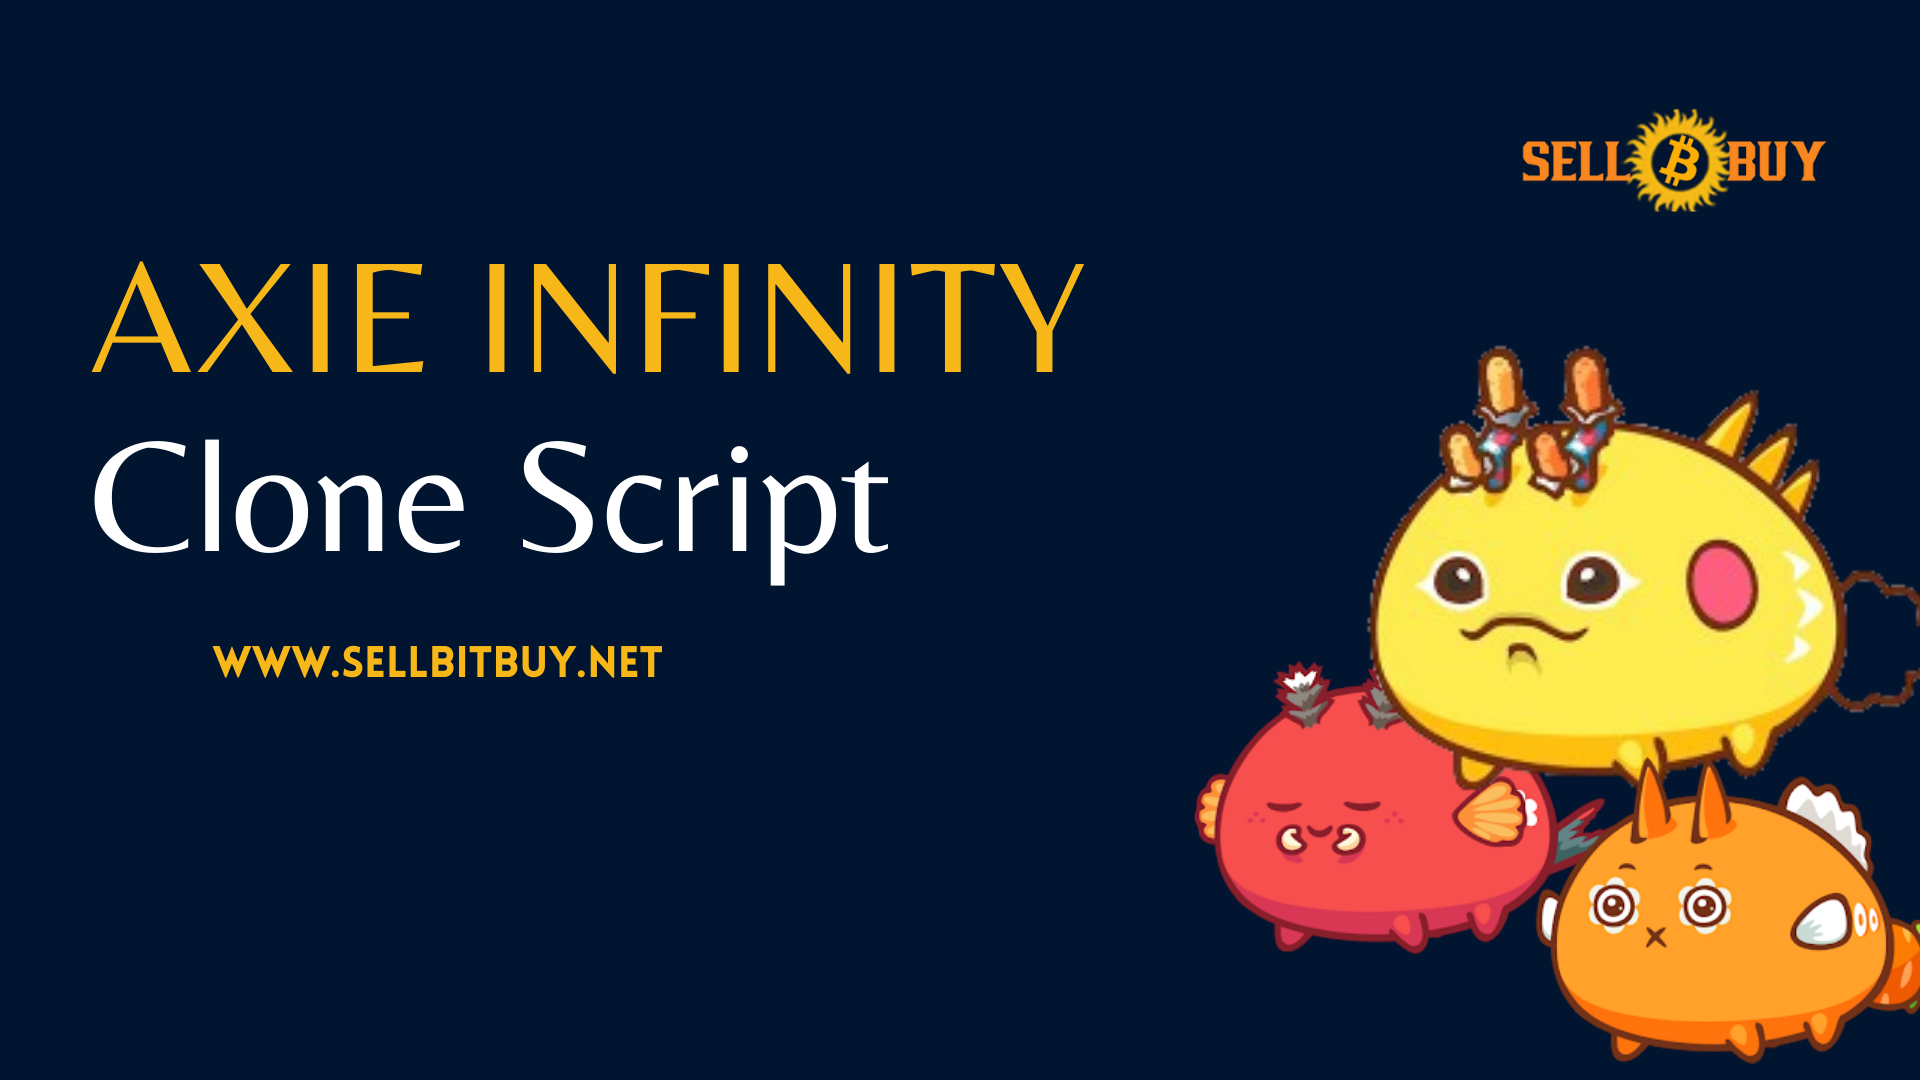 Article about How To Make Money By Starting Axie Infinity Like NFT Game